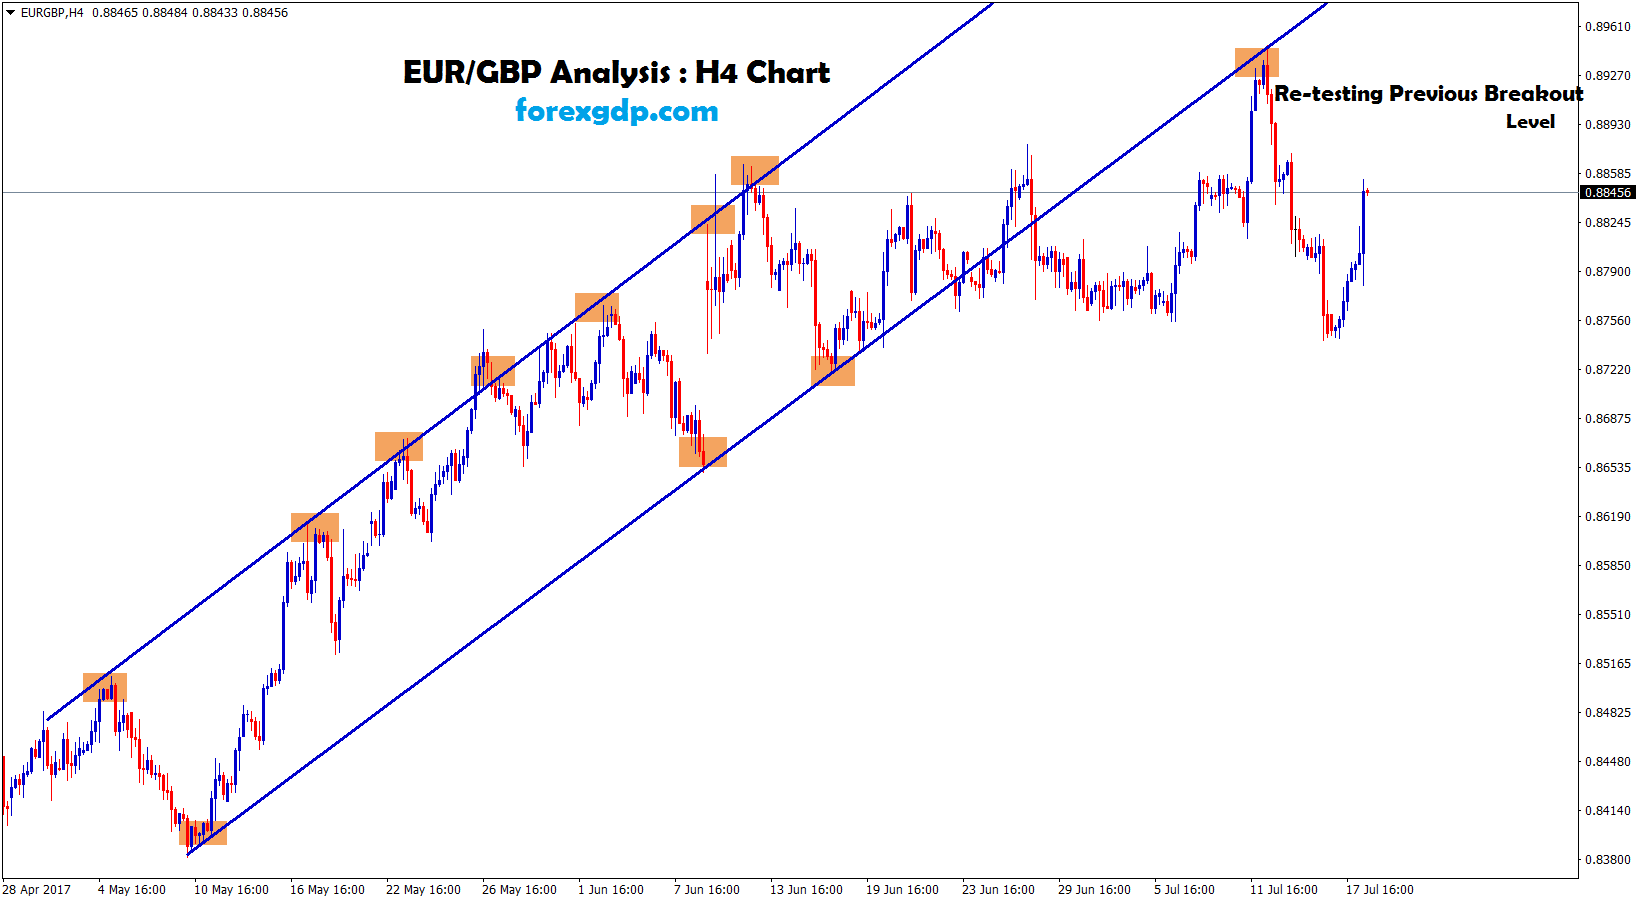 EURGBP retesting the support of the trend line